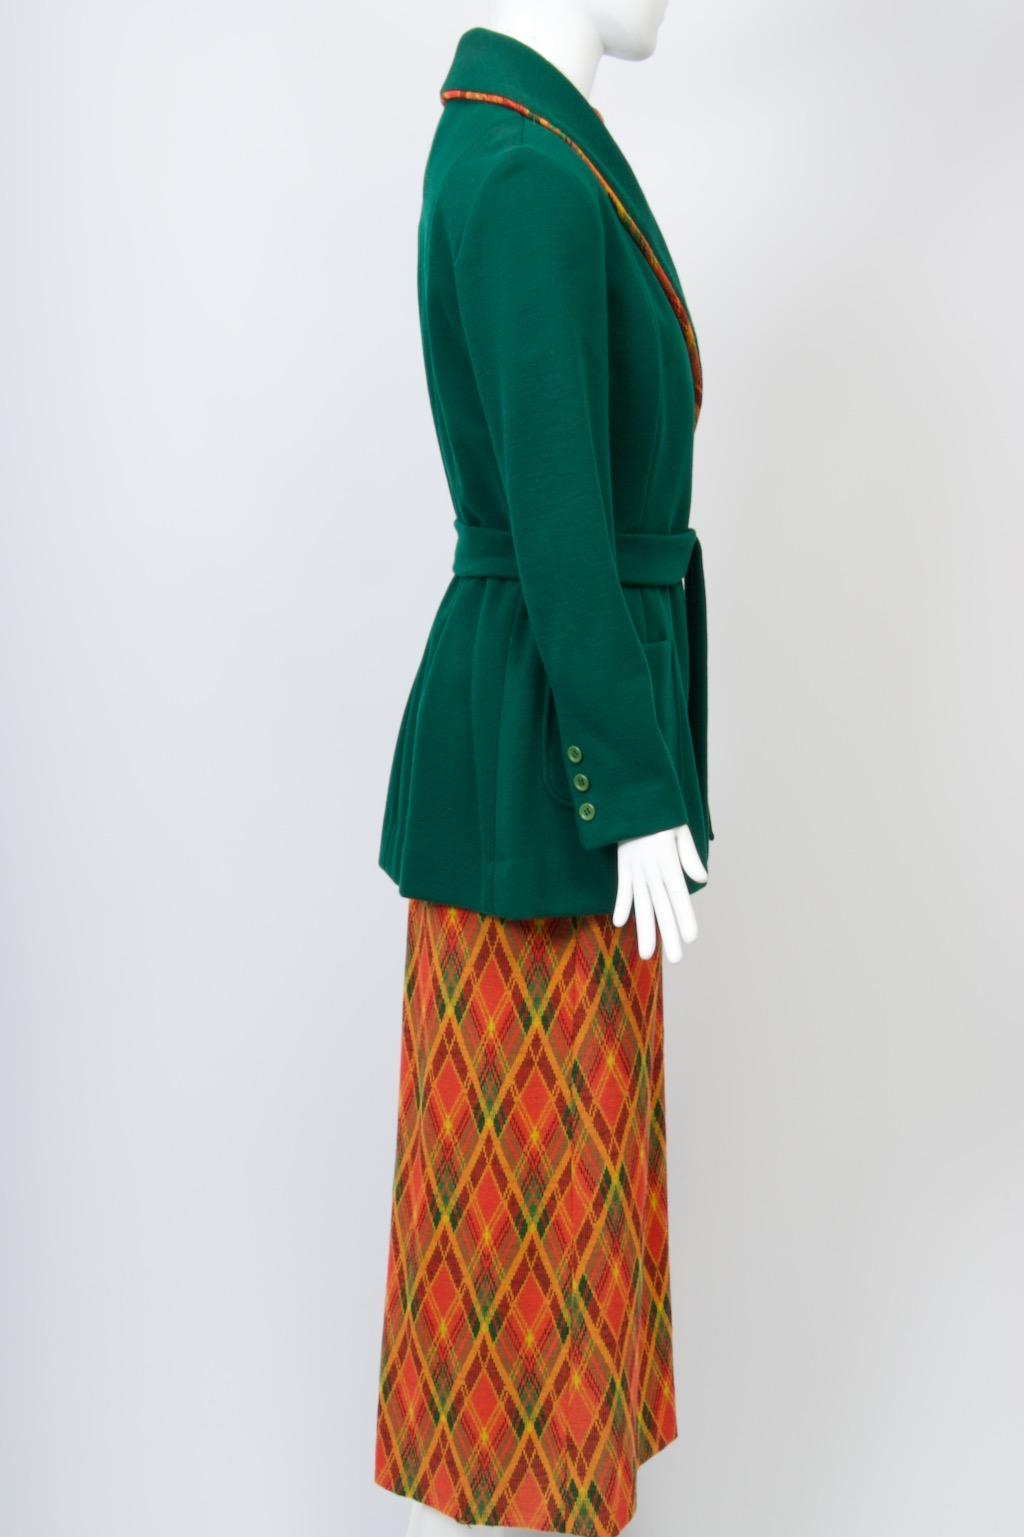 Brenner Couture 1970s unusual knit ensemble consisting of a plaid maxi dress under a forest green jacket. The sleeveless dress features a mandarin collar, deep side slit, and back zipper. Covering the dress is a smoking-style wrap jacket, the